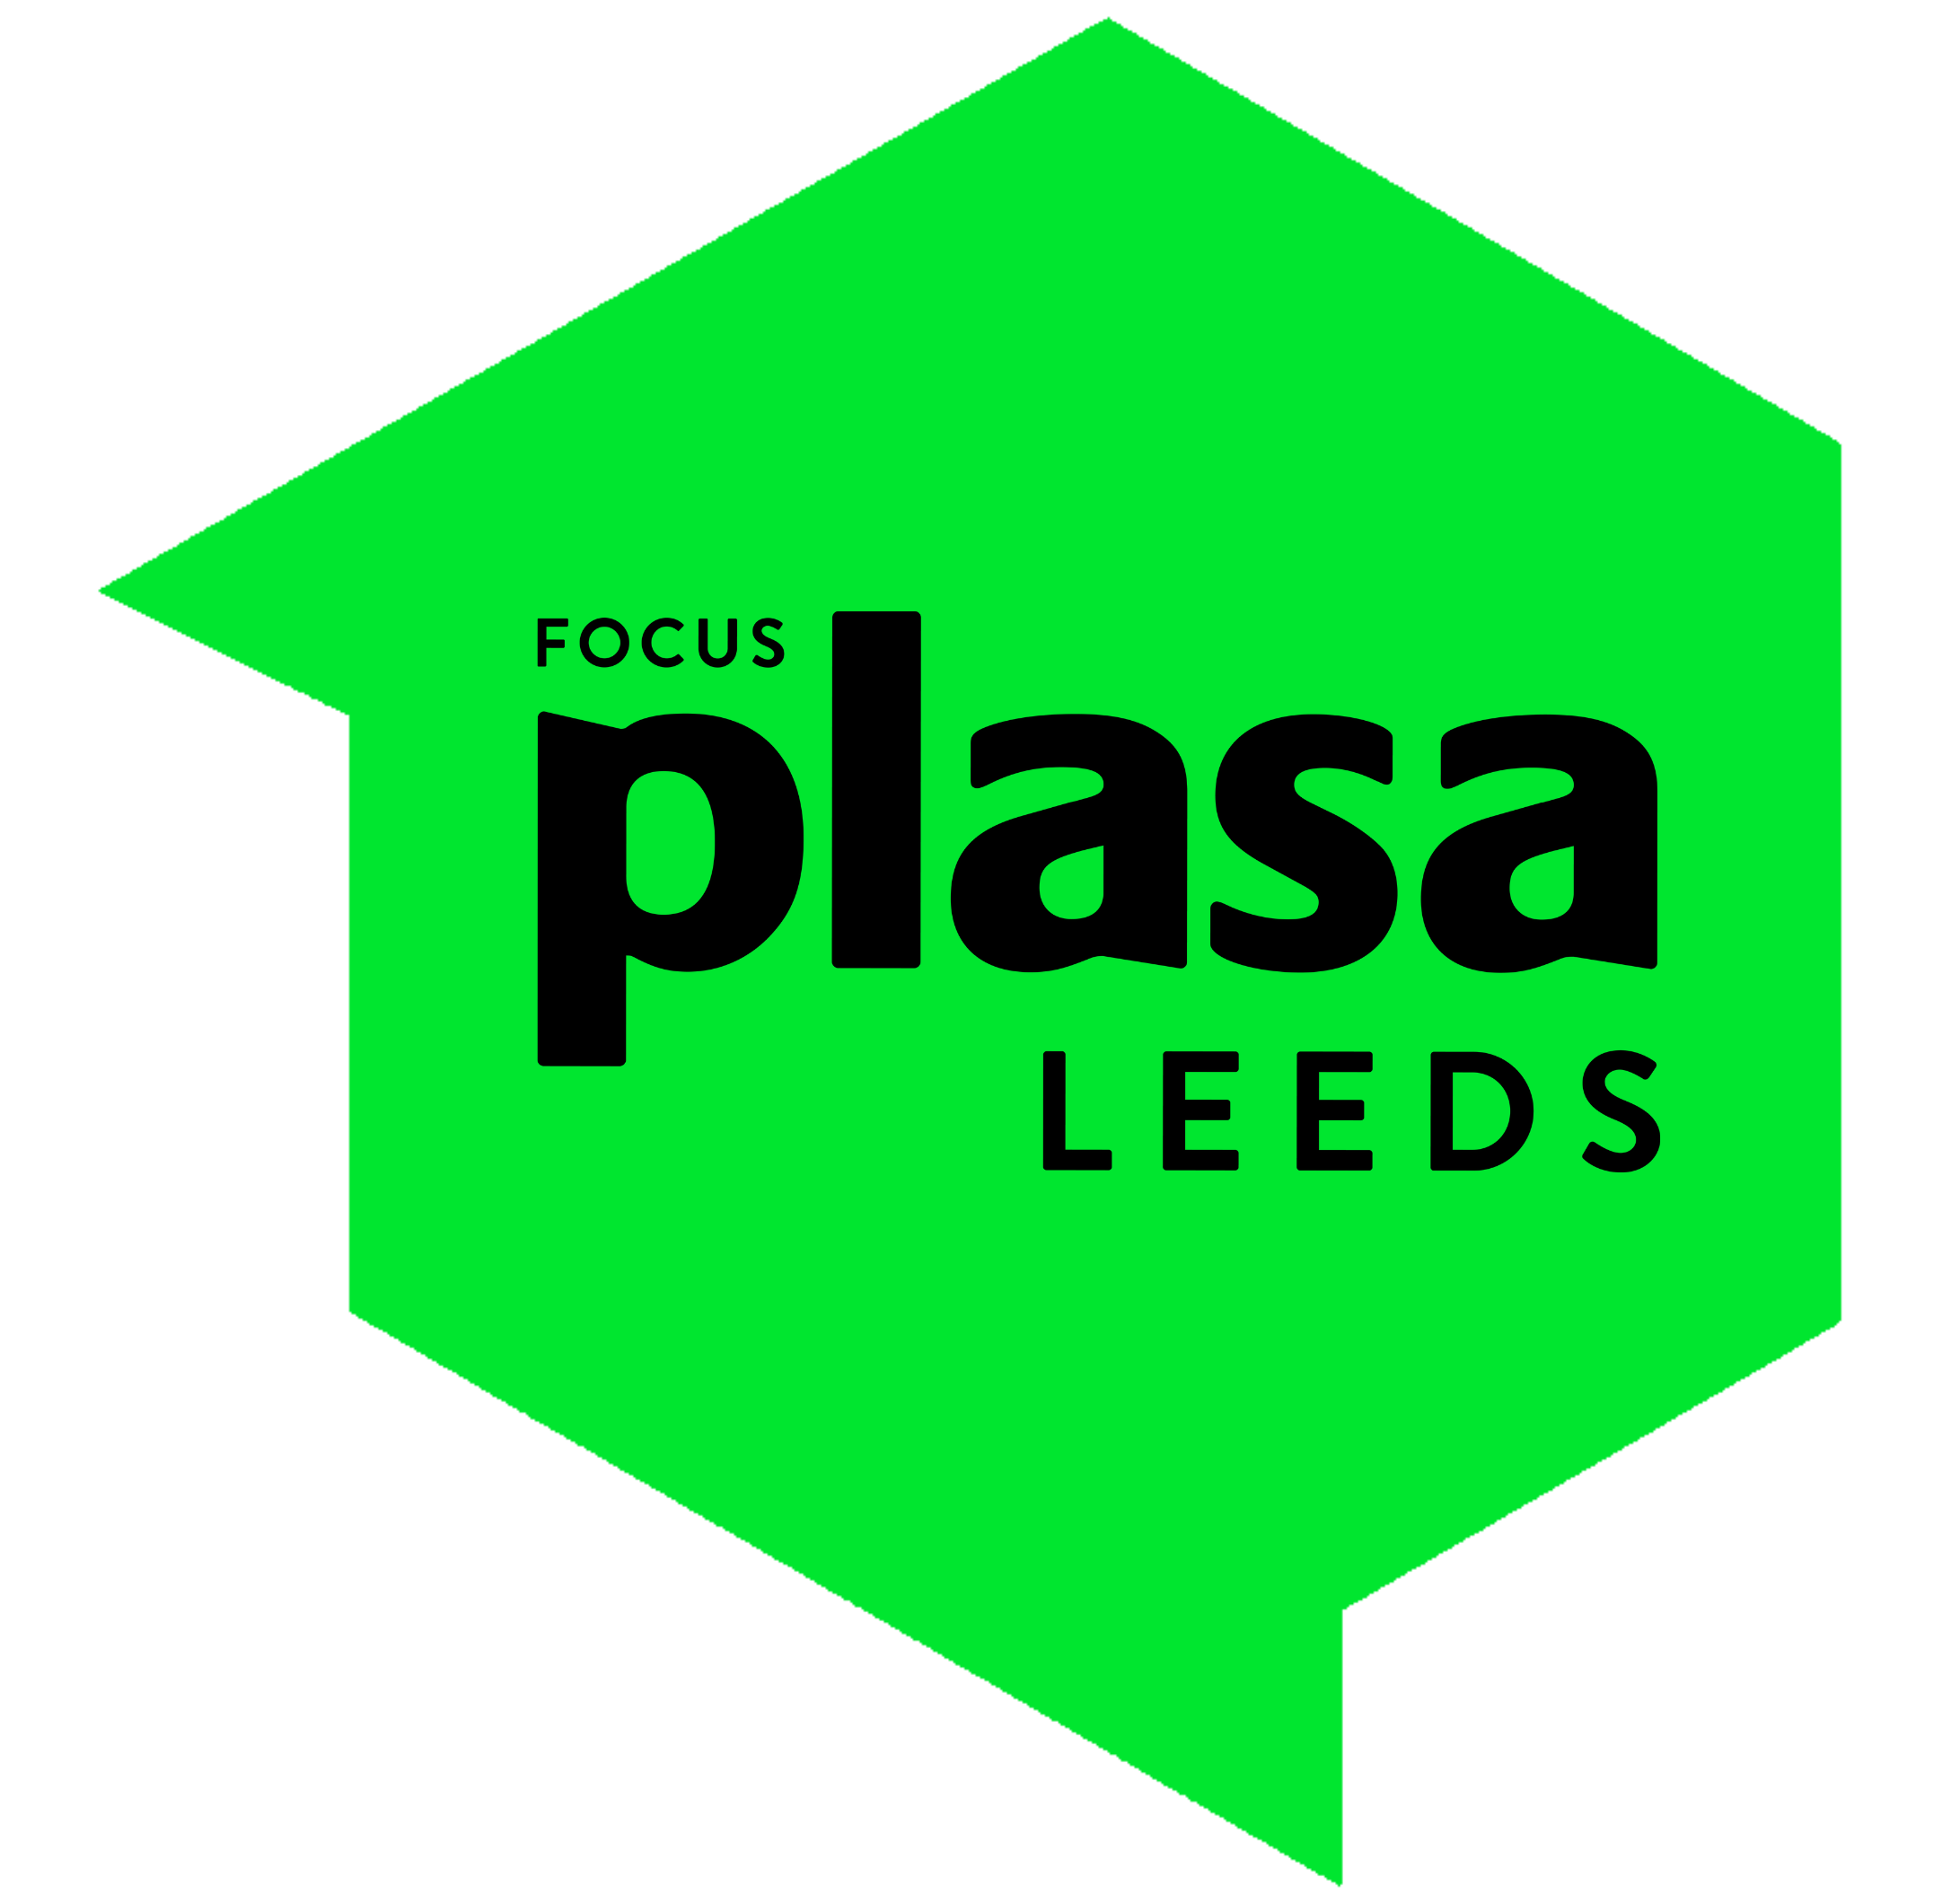 PLASA Focus Leeds 2023 logo with neon green background and black text